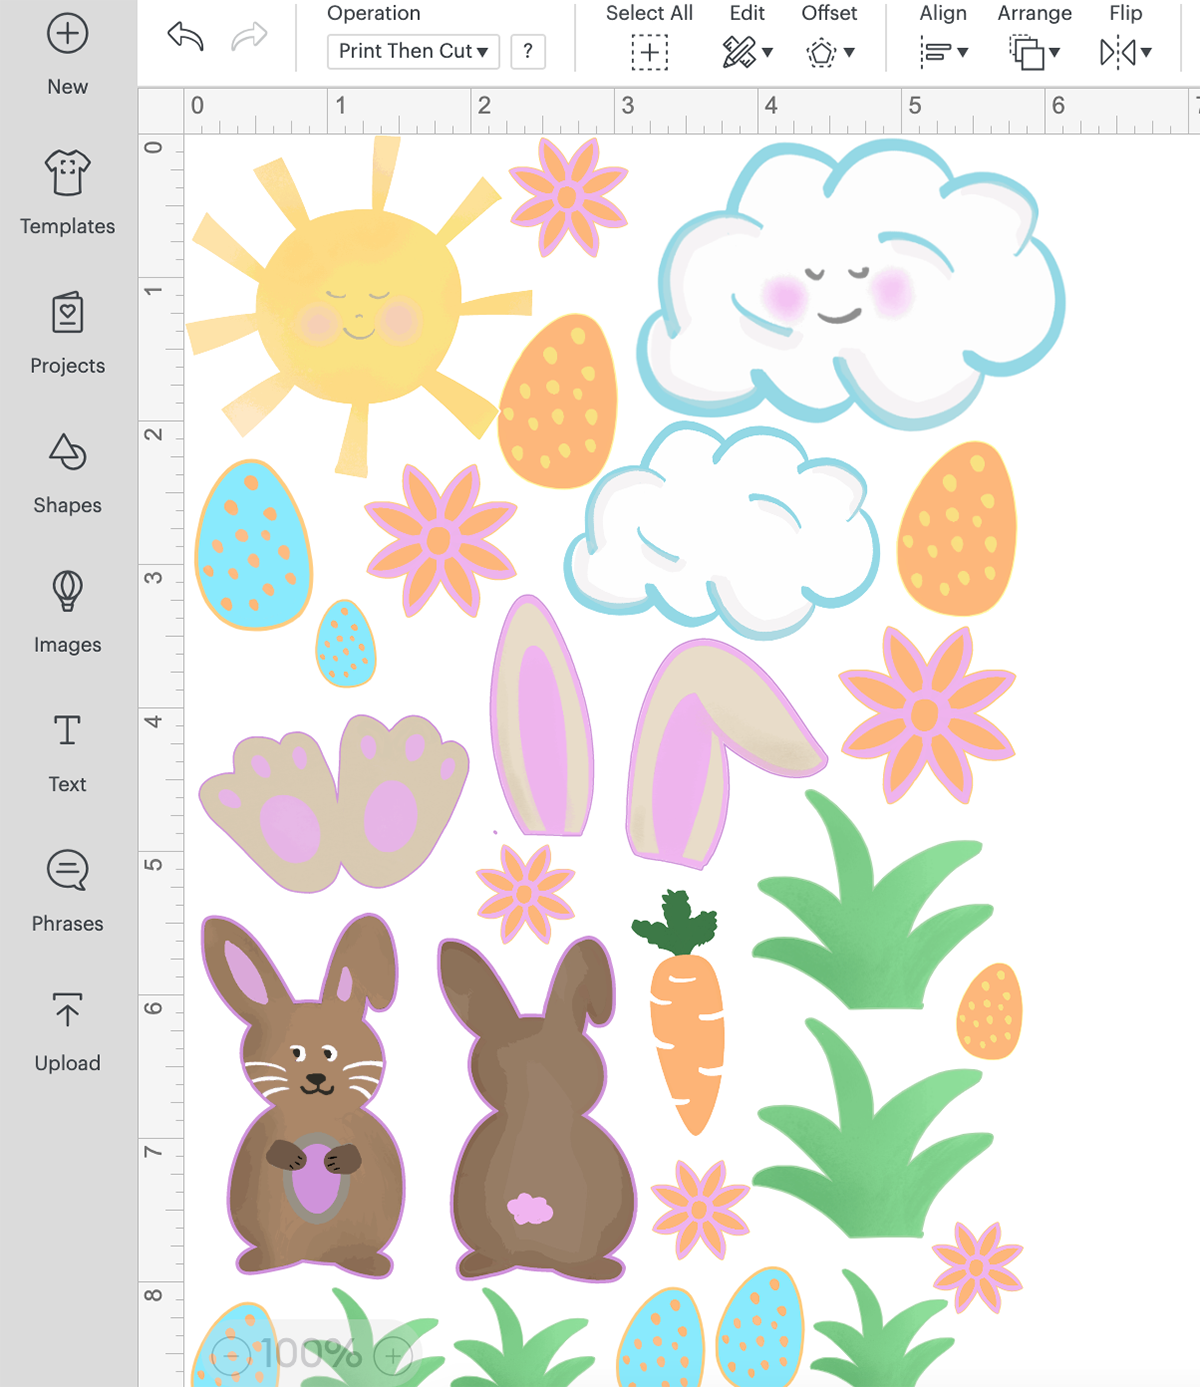 How to make stickers in Cricut Design Space